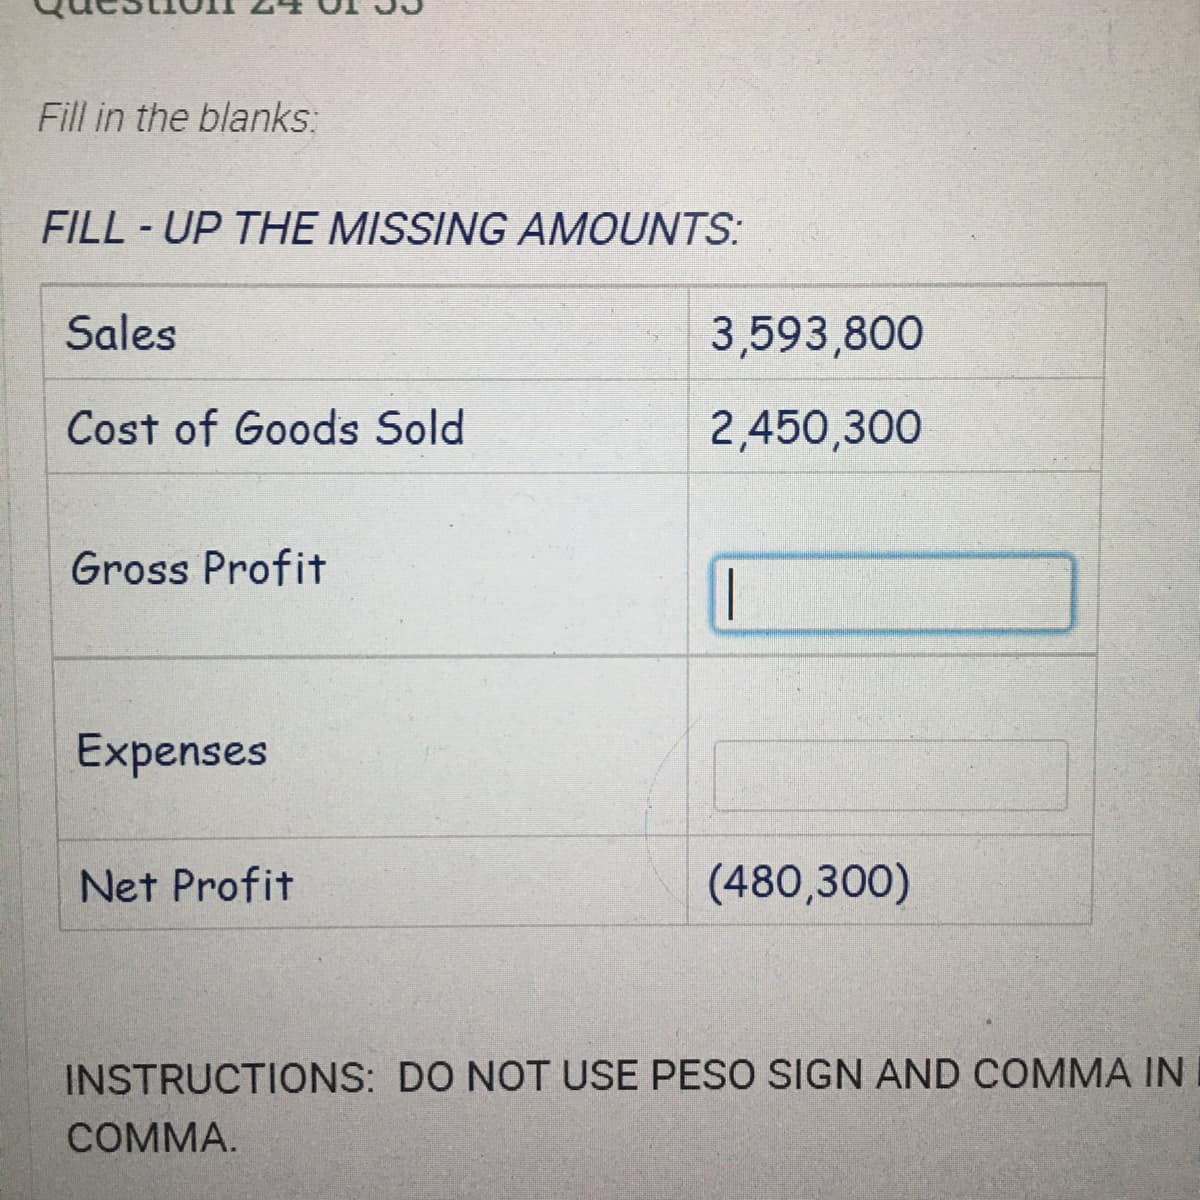 Fill in the blanks:
FILL - UP THE MISSING AMOUNTS:
Sales
3,593,800
Cost of Goods Sold
2,450,300
Gross Profit
|
Expenses
Net Profit
(480,300)
INSTRUCTIONS: DO NOT USE PESO SIGN AND COMMA IN
СOMMA.
